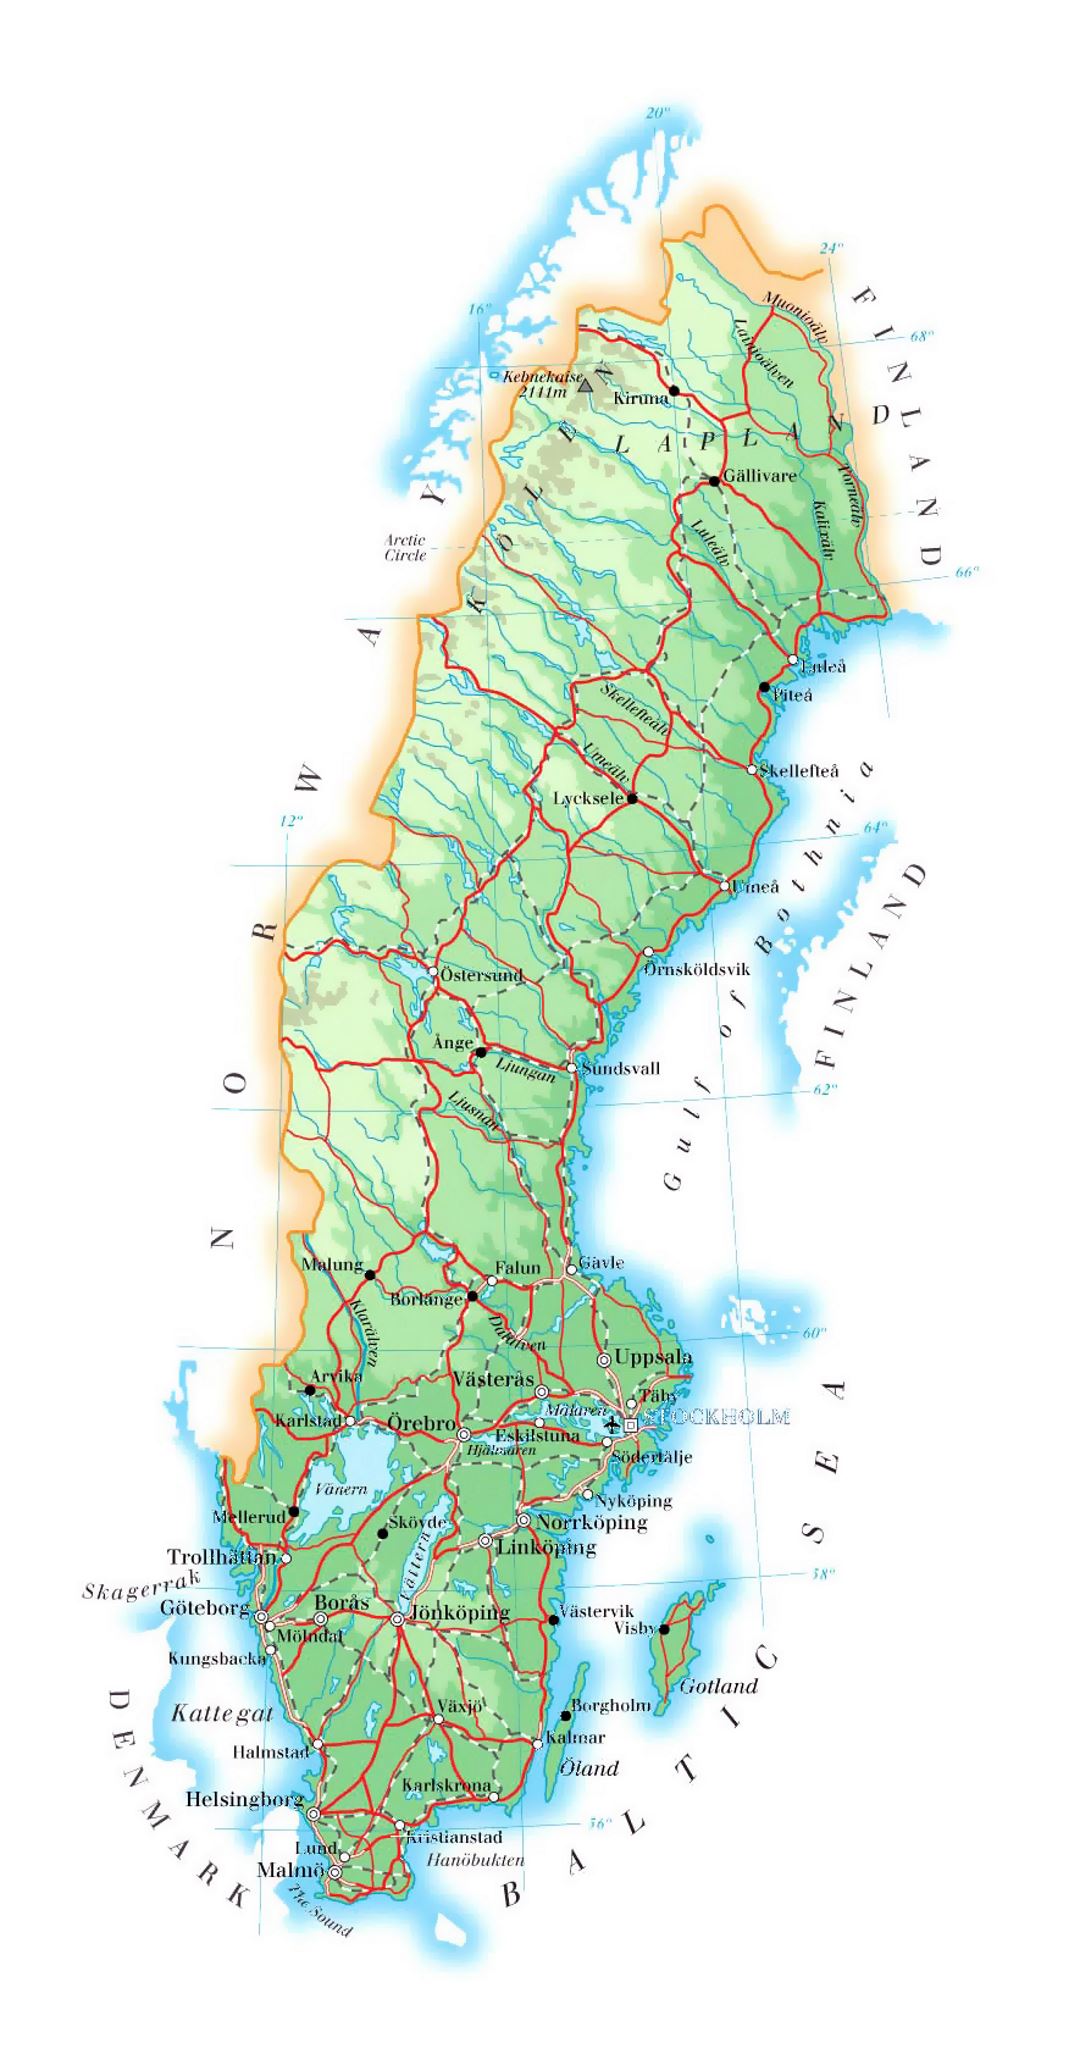 Detailed elevation map of Sweden with roads, cities and airports